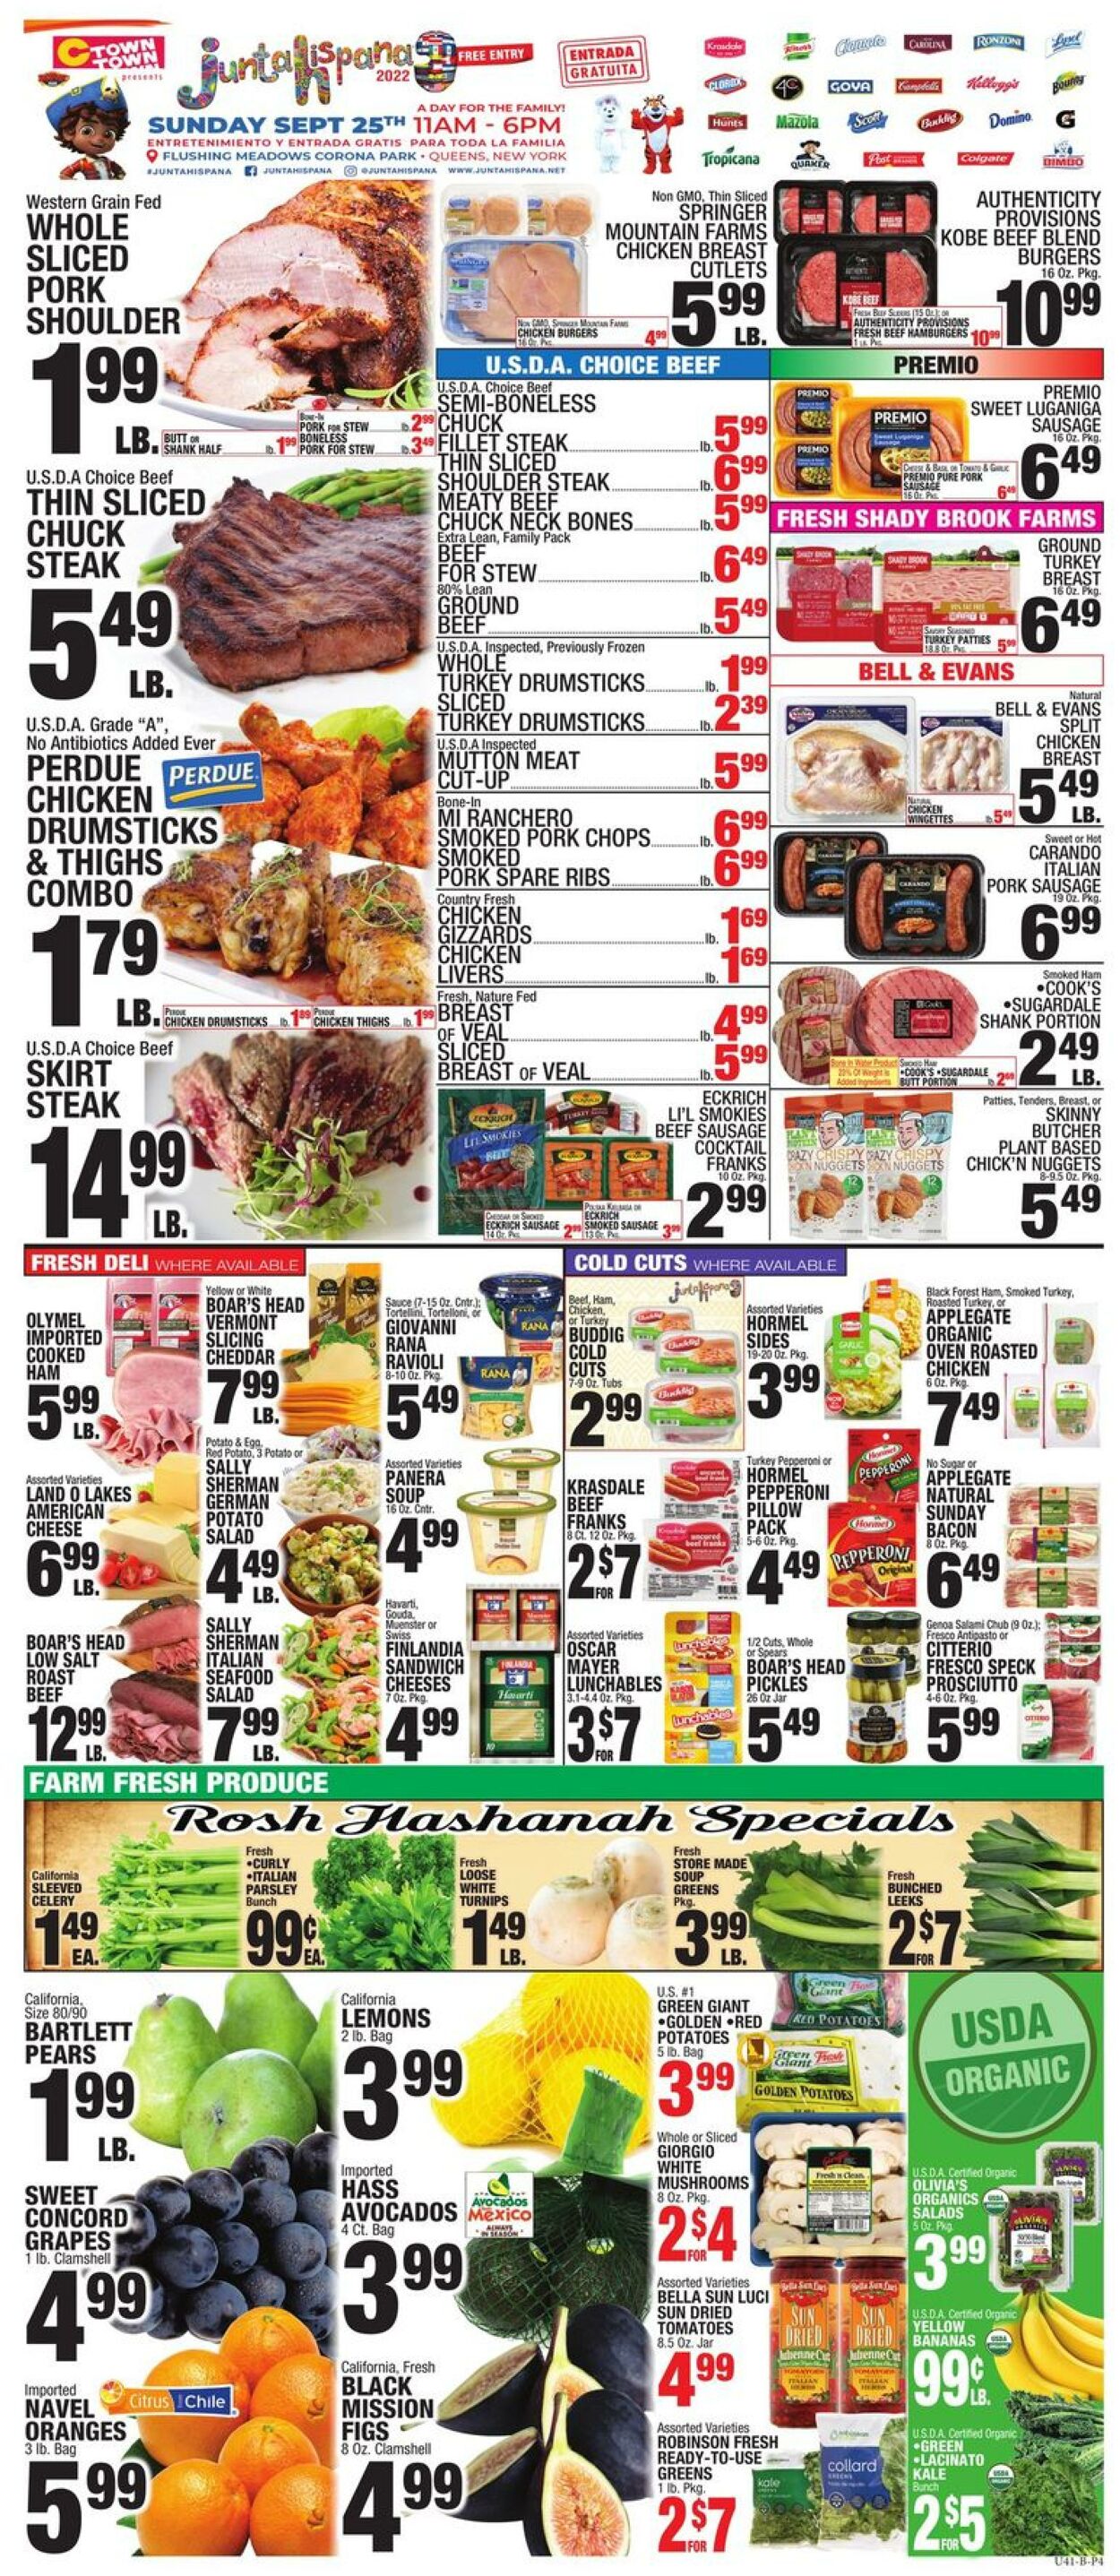 Weekly ad CTown 09/16/2022 - 09/22/2022